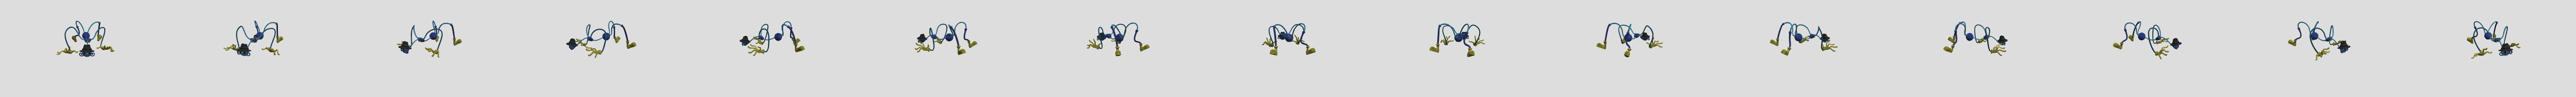 Project Playtime  Daddy Long Legs - Download Free 3D model by Xoffly  (@Xoffly) [449c543]